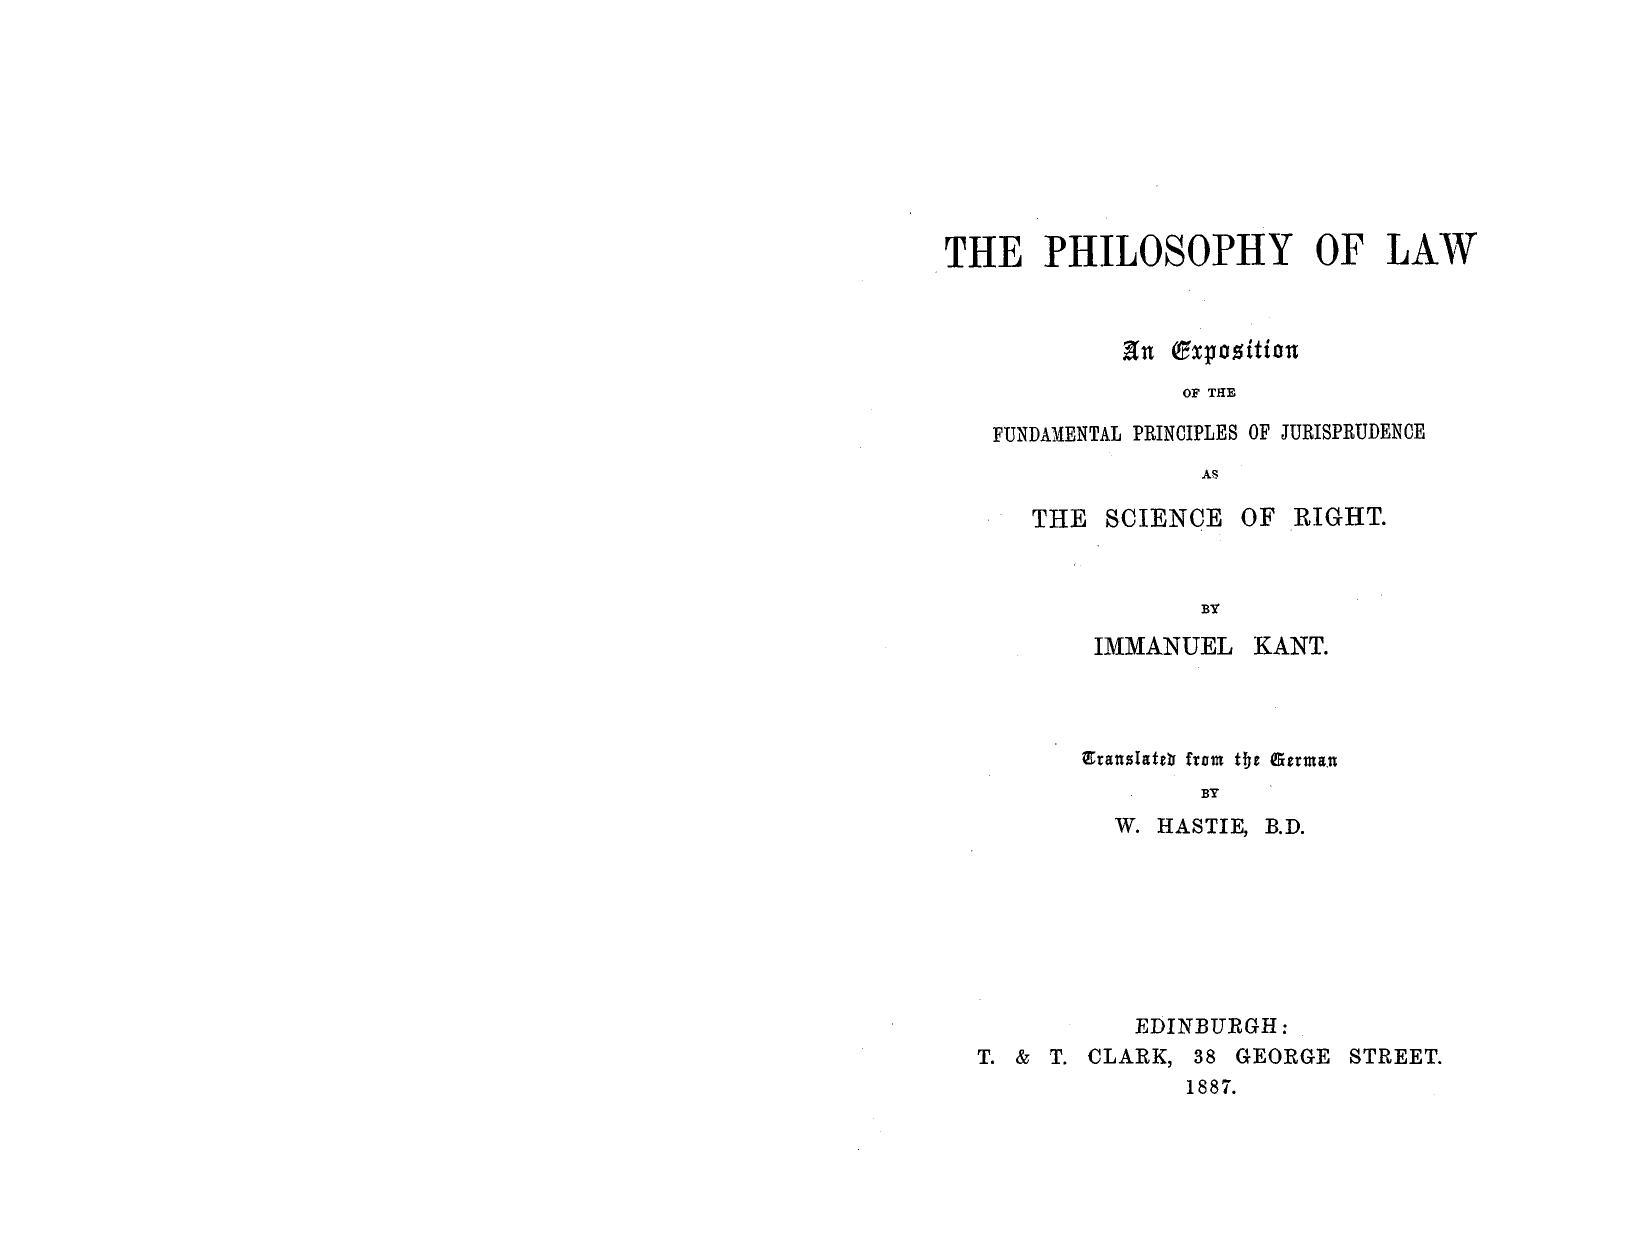 Immanuel Kant - The Philosophy of Law by 1887